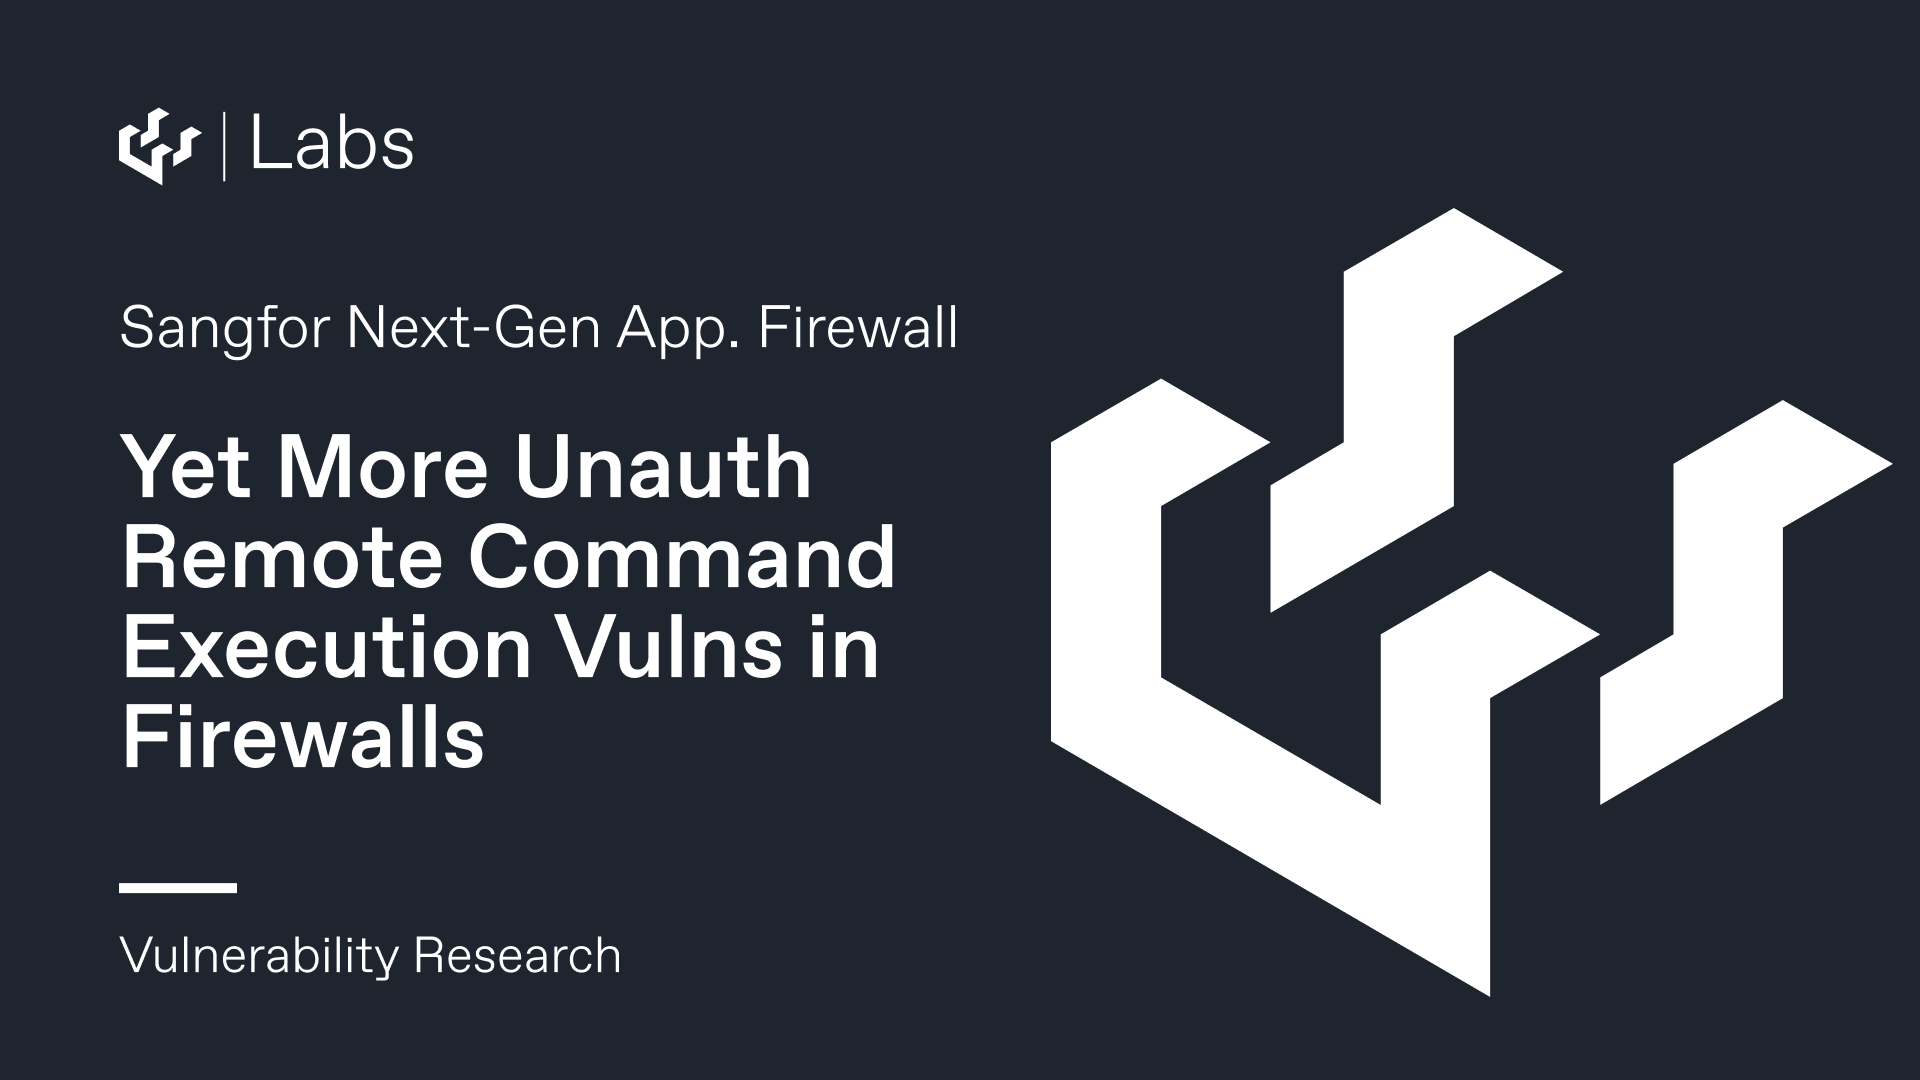 Yet More Unauth Remote Command Execution Vulns in Firewalls - Sangfor Edition